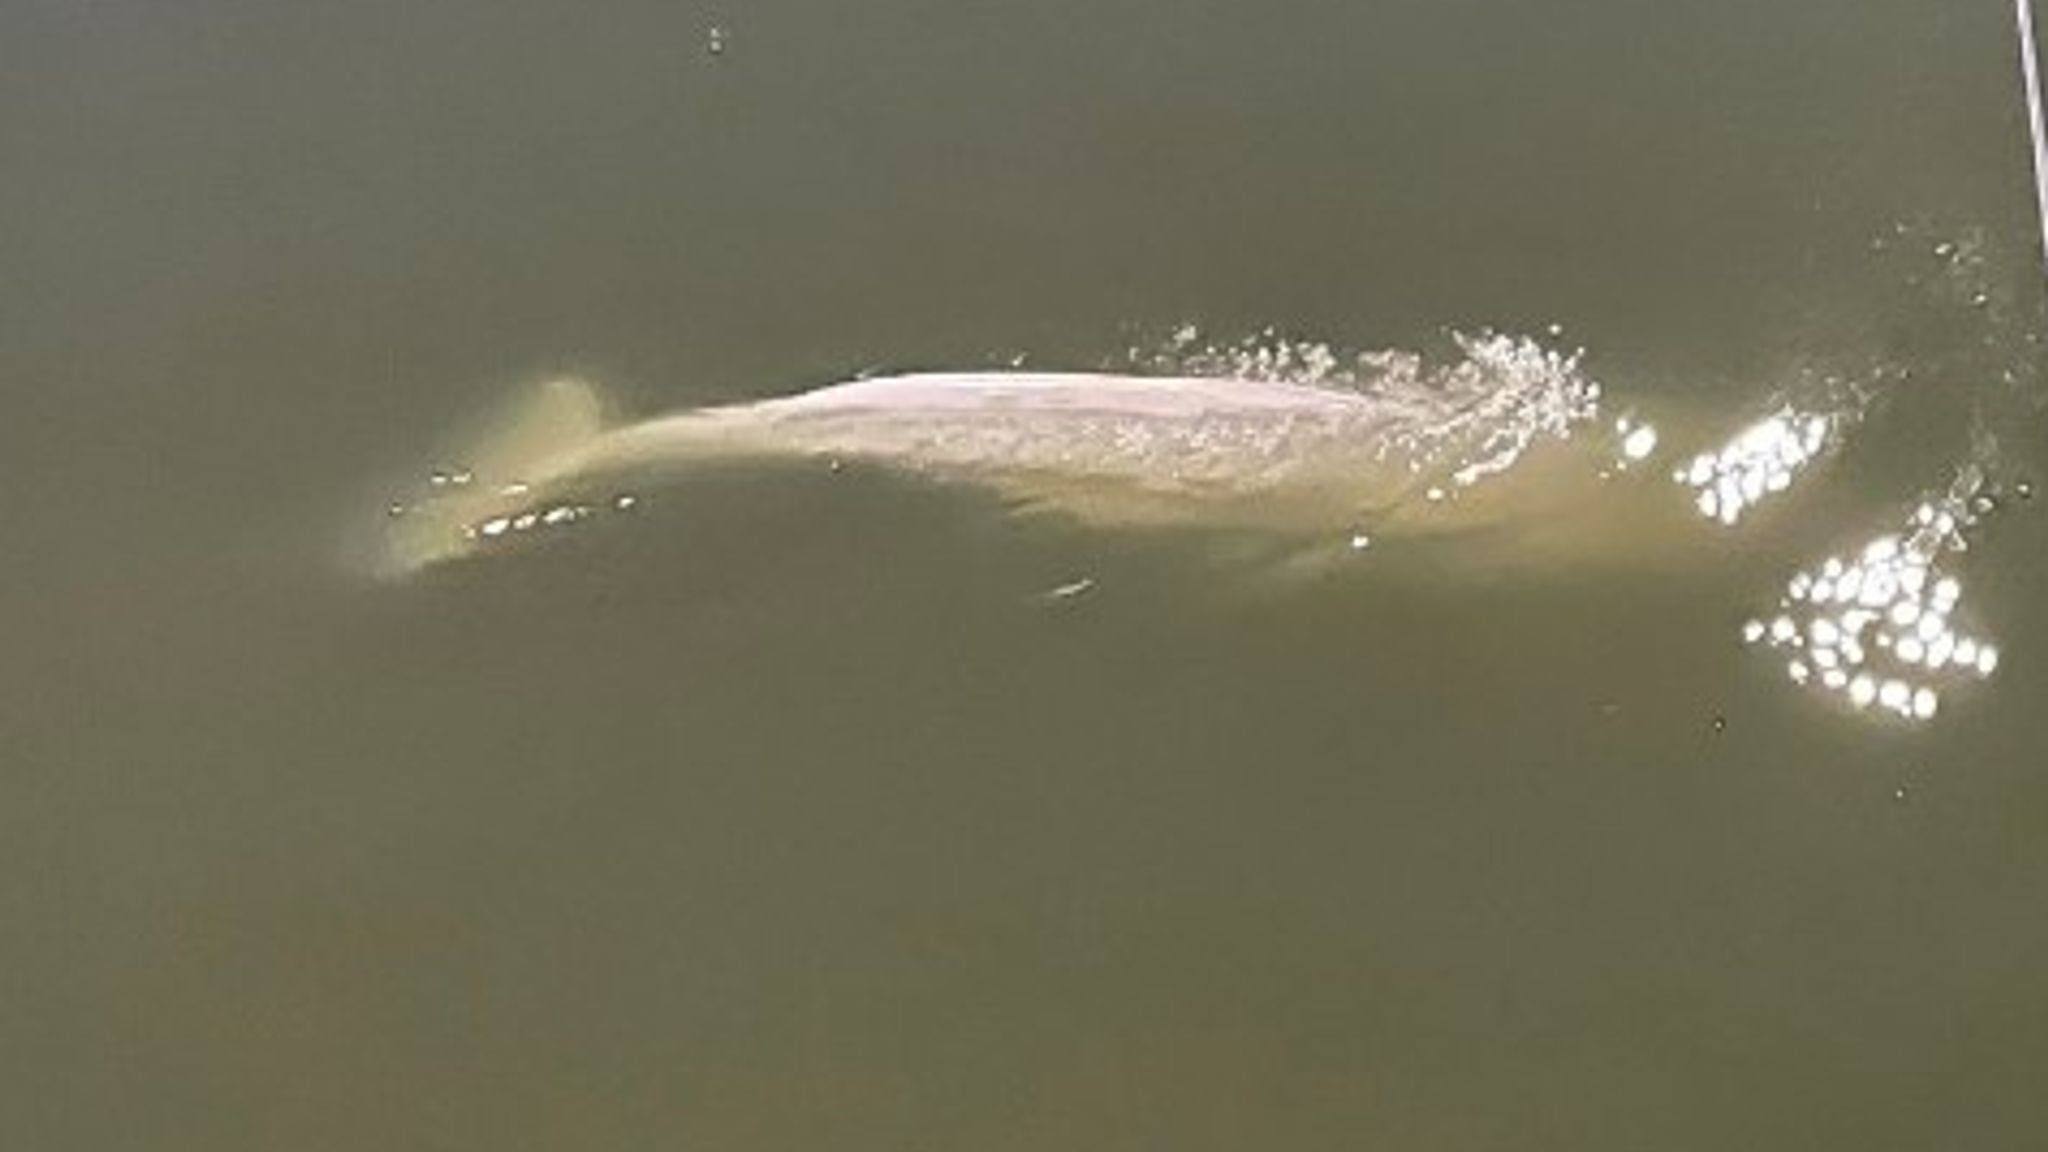 Beluga whale lost in River Seine, France dangerously thin and refusing food